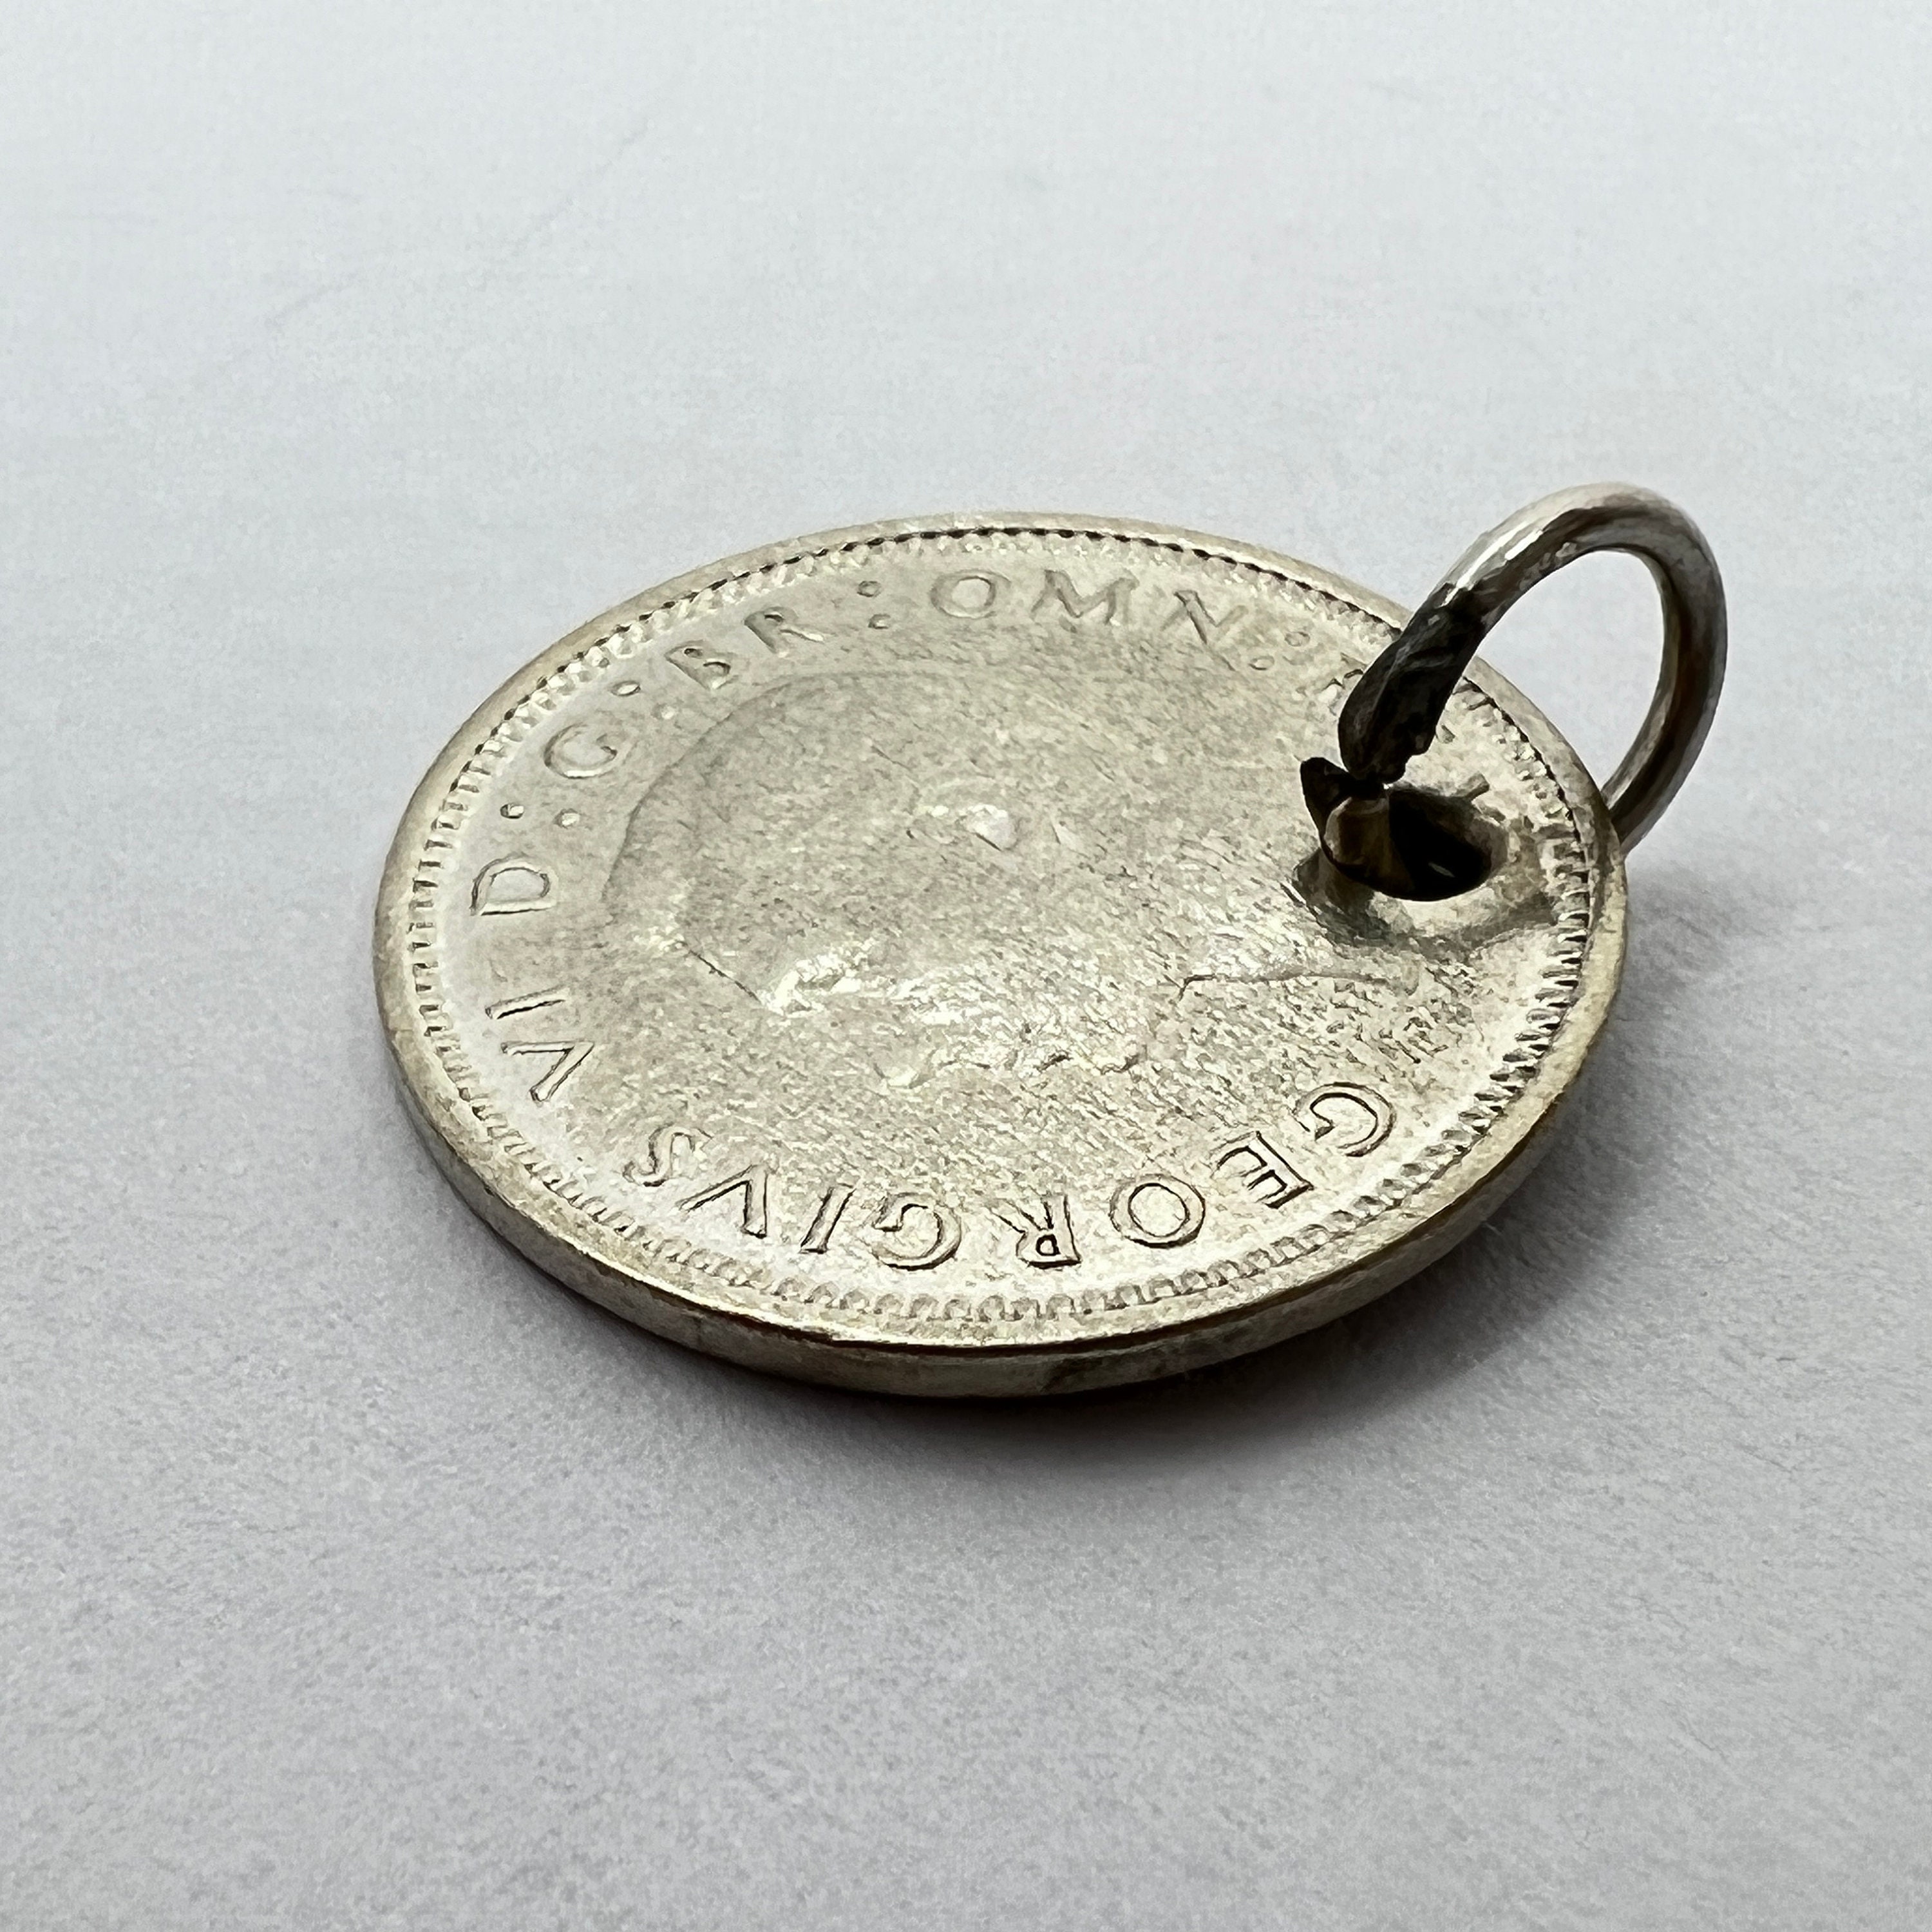 Details about   VINTAGE ENGLISH STERLING SILVER 1940 LUCKY THREEPENCE COIN FOB CHARM PENDANT OLD 